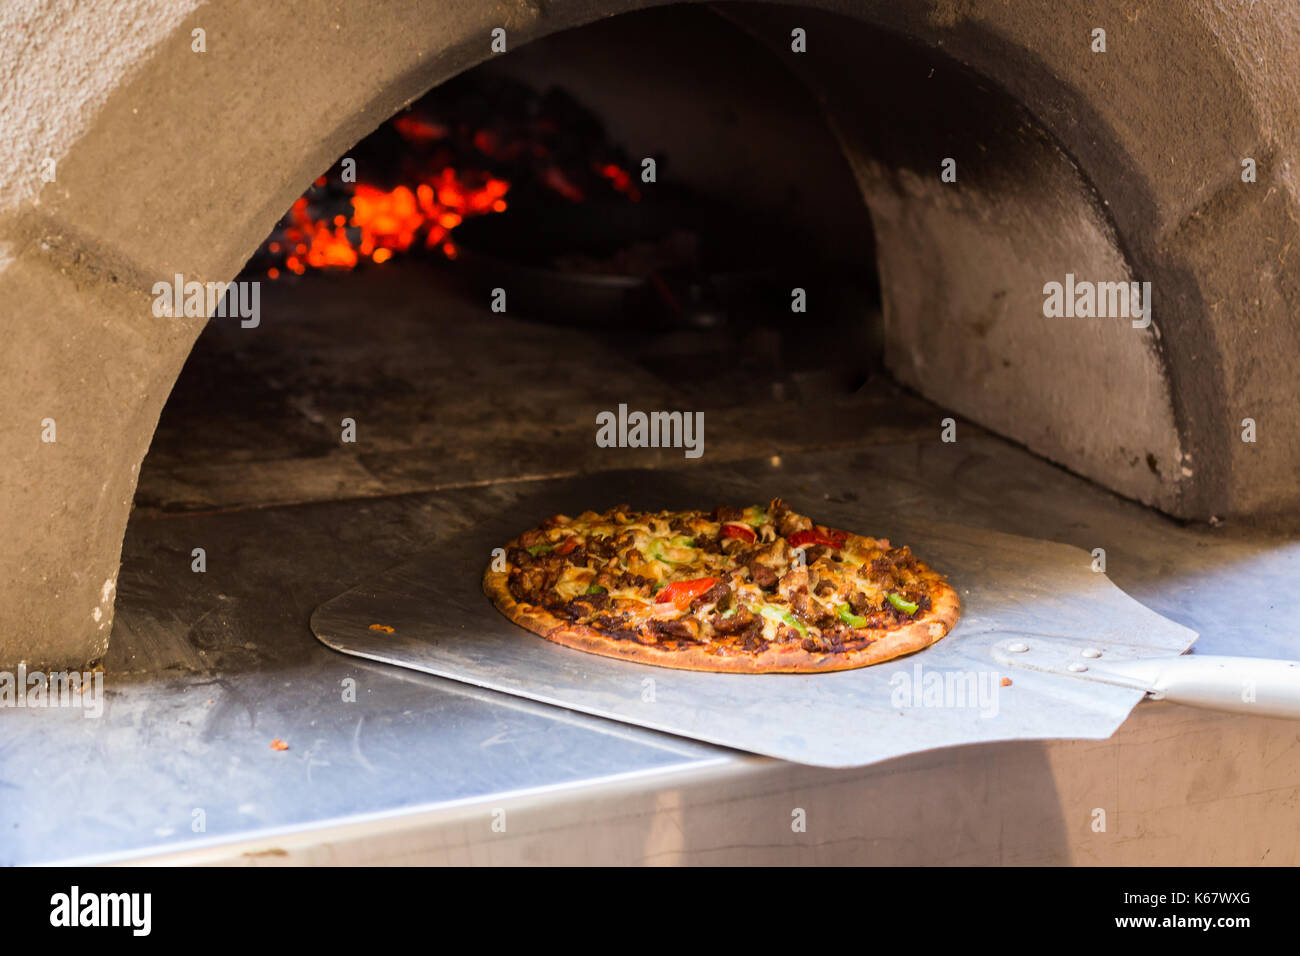 Removing a pizza from wood-fired pizza oven Stock Photo